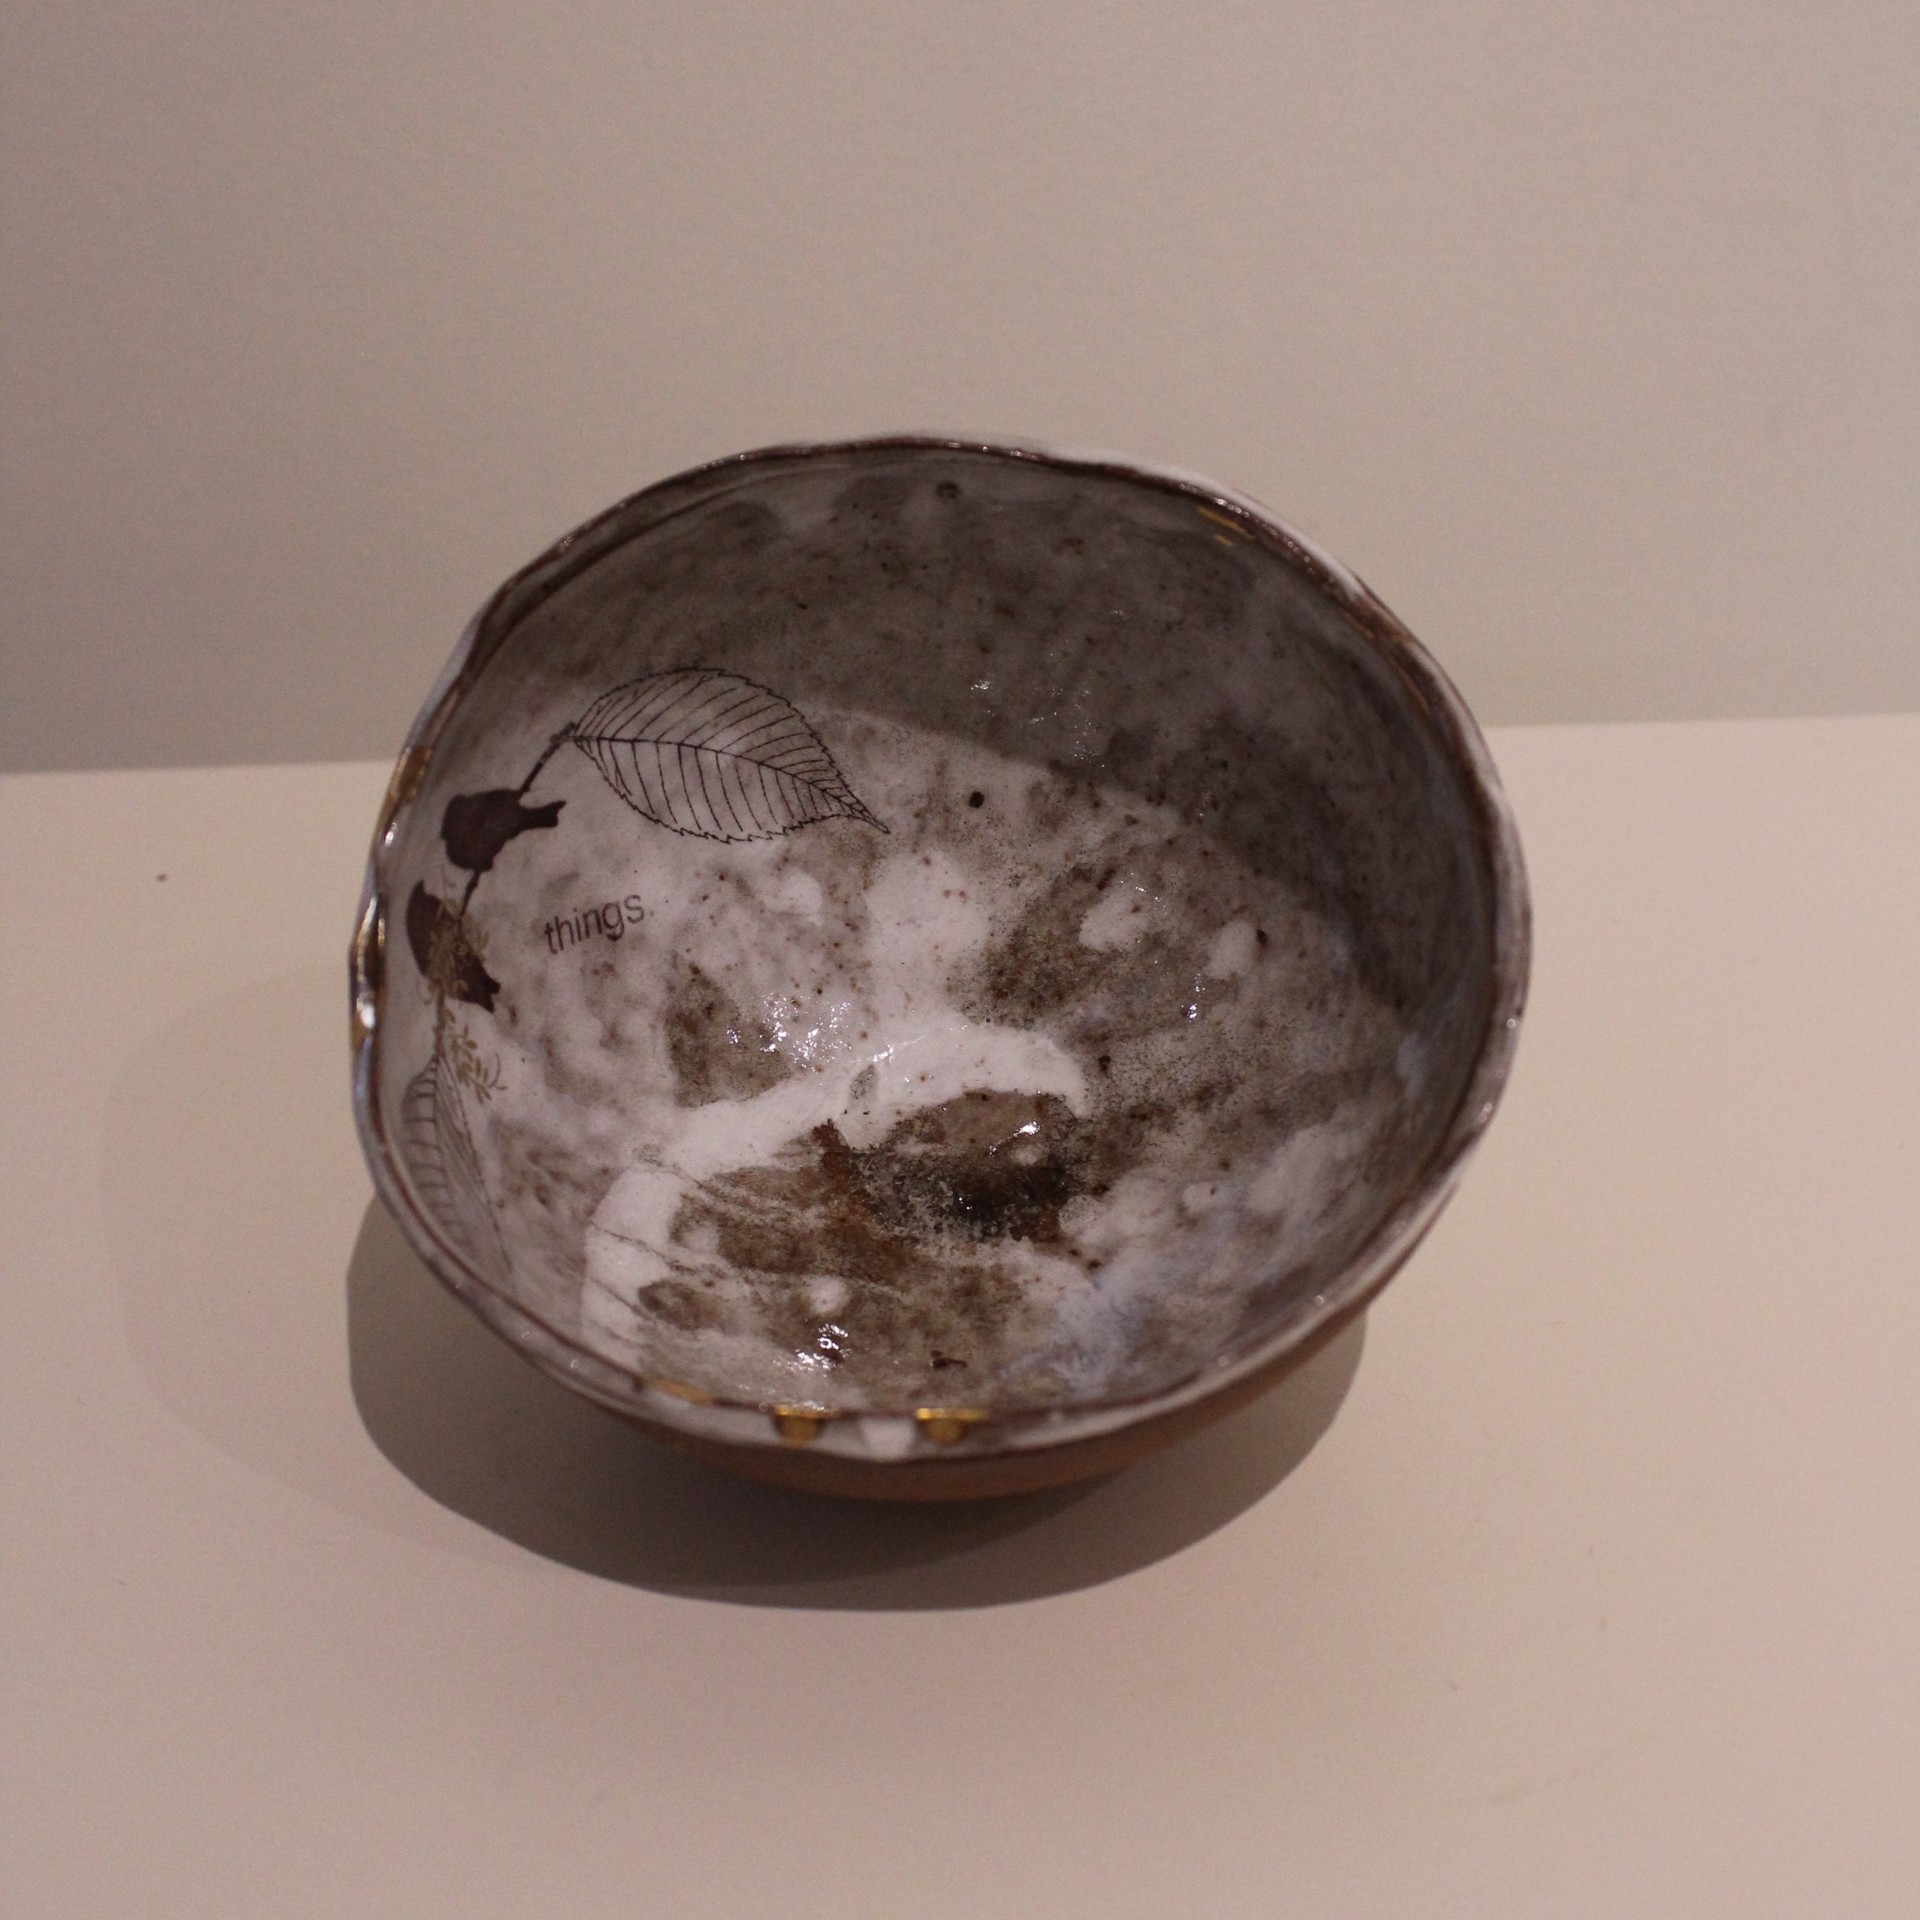 Tea Bowl 5 (things) by Therese Knowles